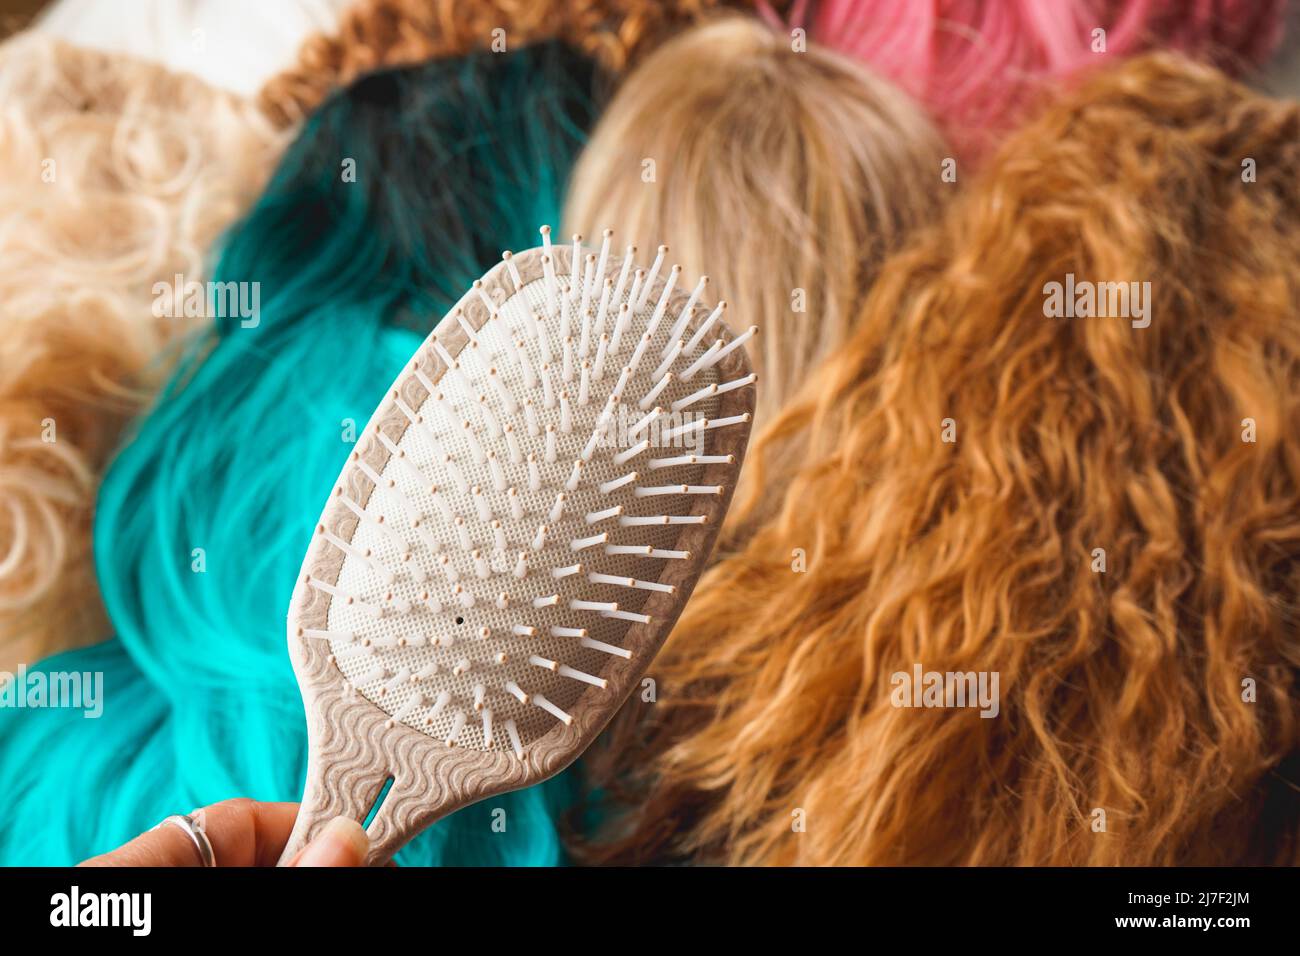 Close up of a hair brush against a background of a lot of wigs of different colors and styles Stock Photo